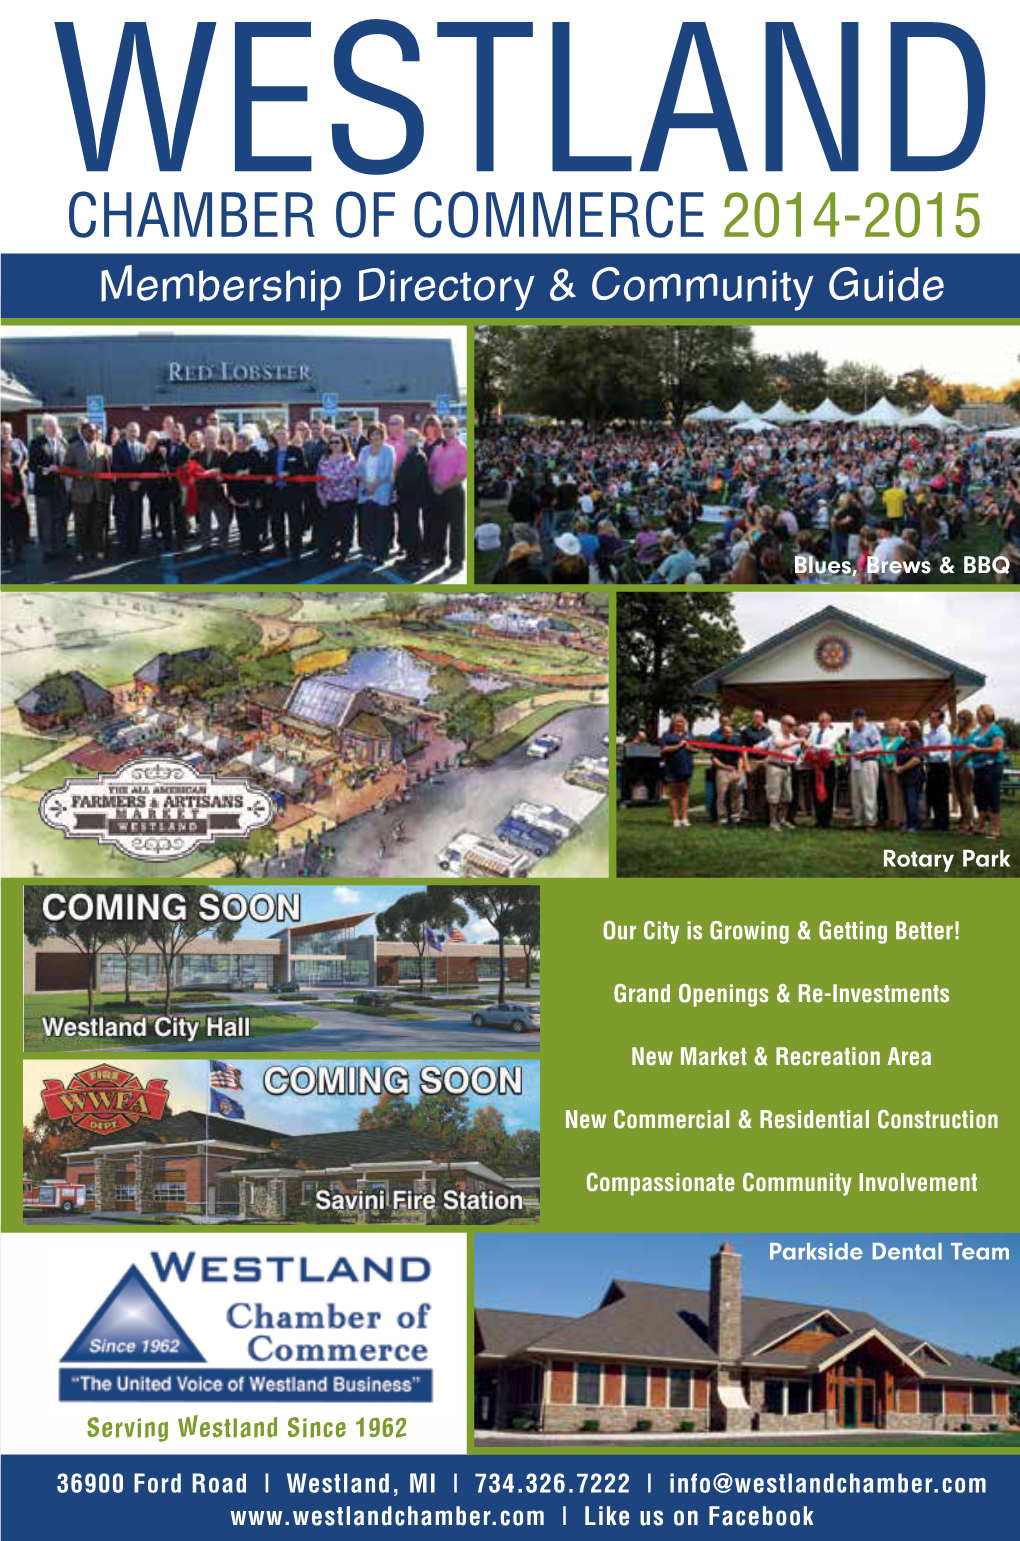 CHAMBER of COMMERCE 2014-2015 Membership Directory & Community Guide